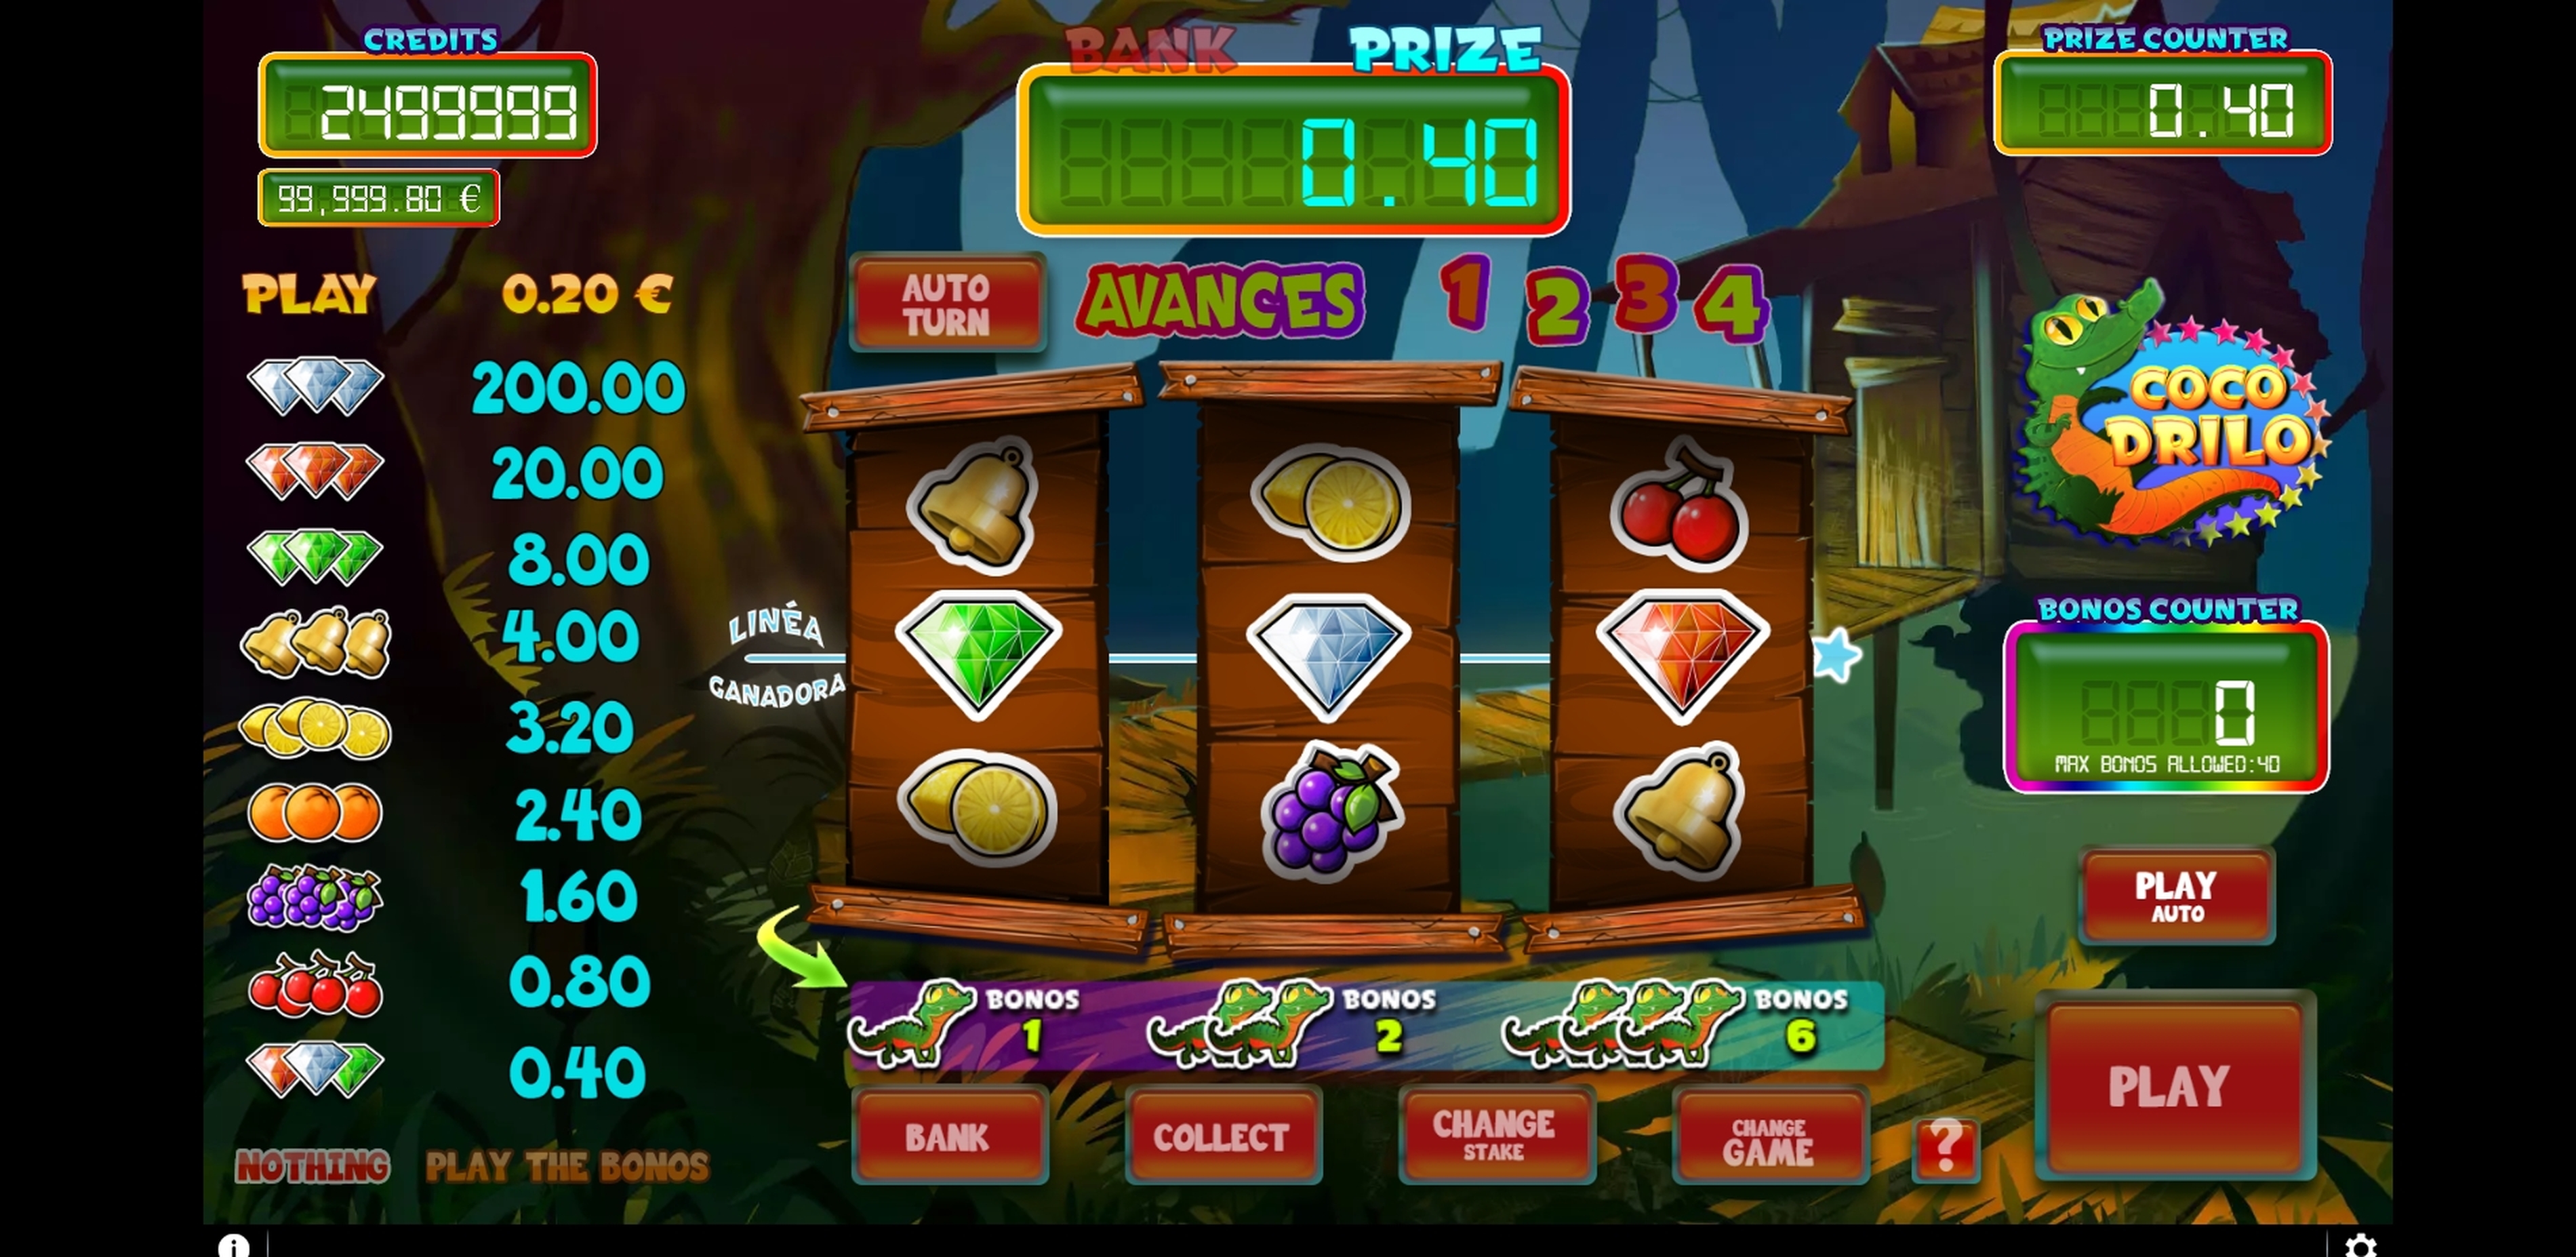 Win Money in Coco Drilo Free Slot Game by GAMING1